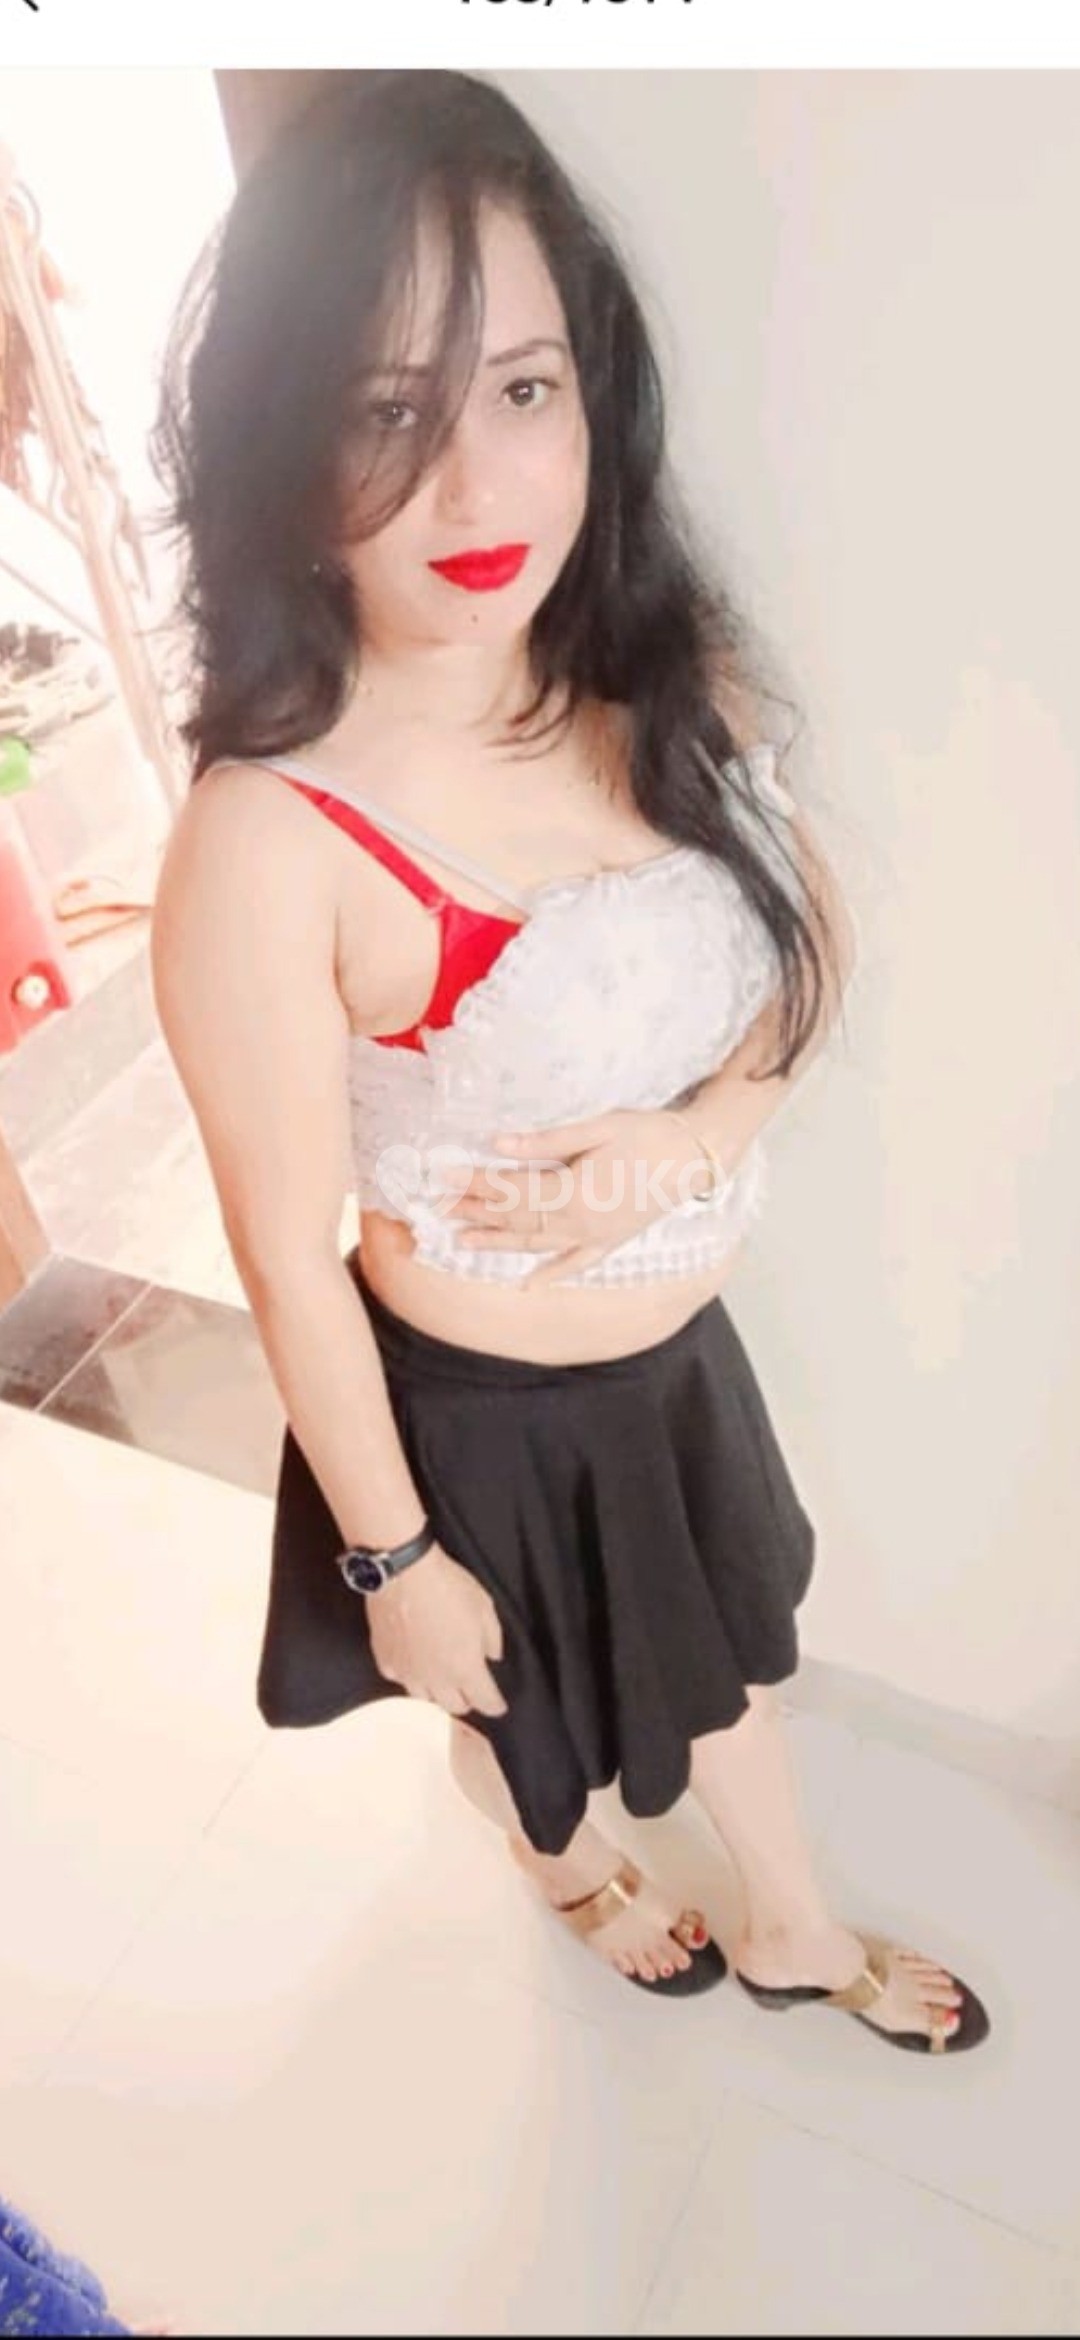 Hi i am Ritu mohali 99887-43794 HAND TO HAND PAYMENT CALL ME ANYTIME FOR REAL AND GENUINE SERVICE WITHOUT ANY ADVANCE.